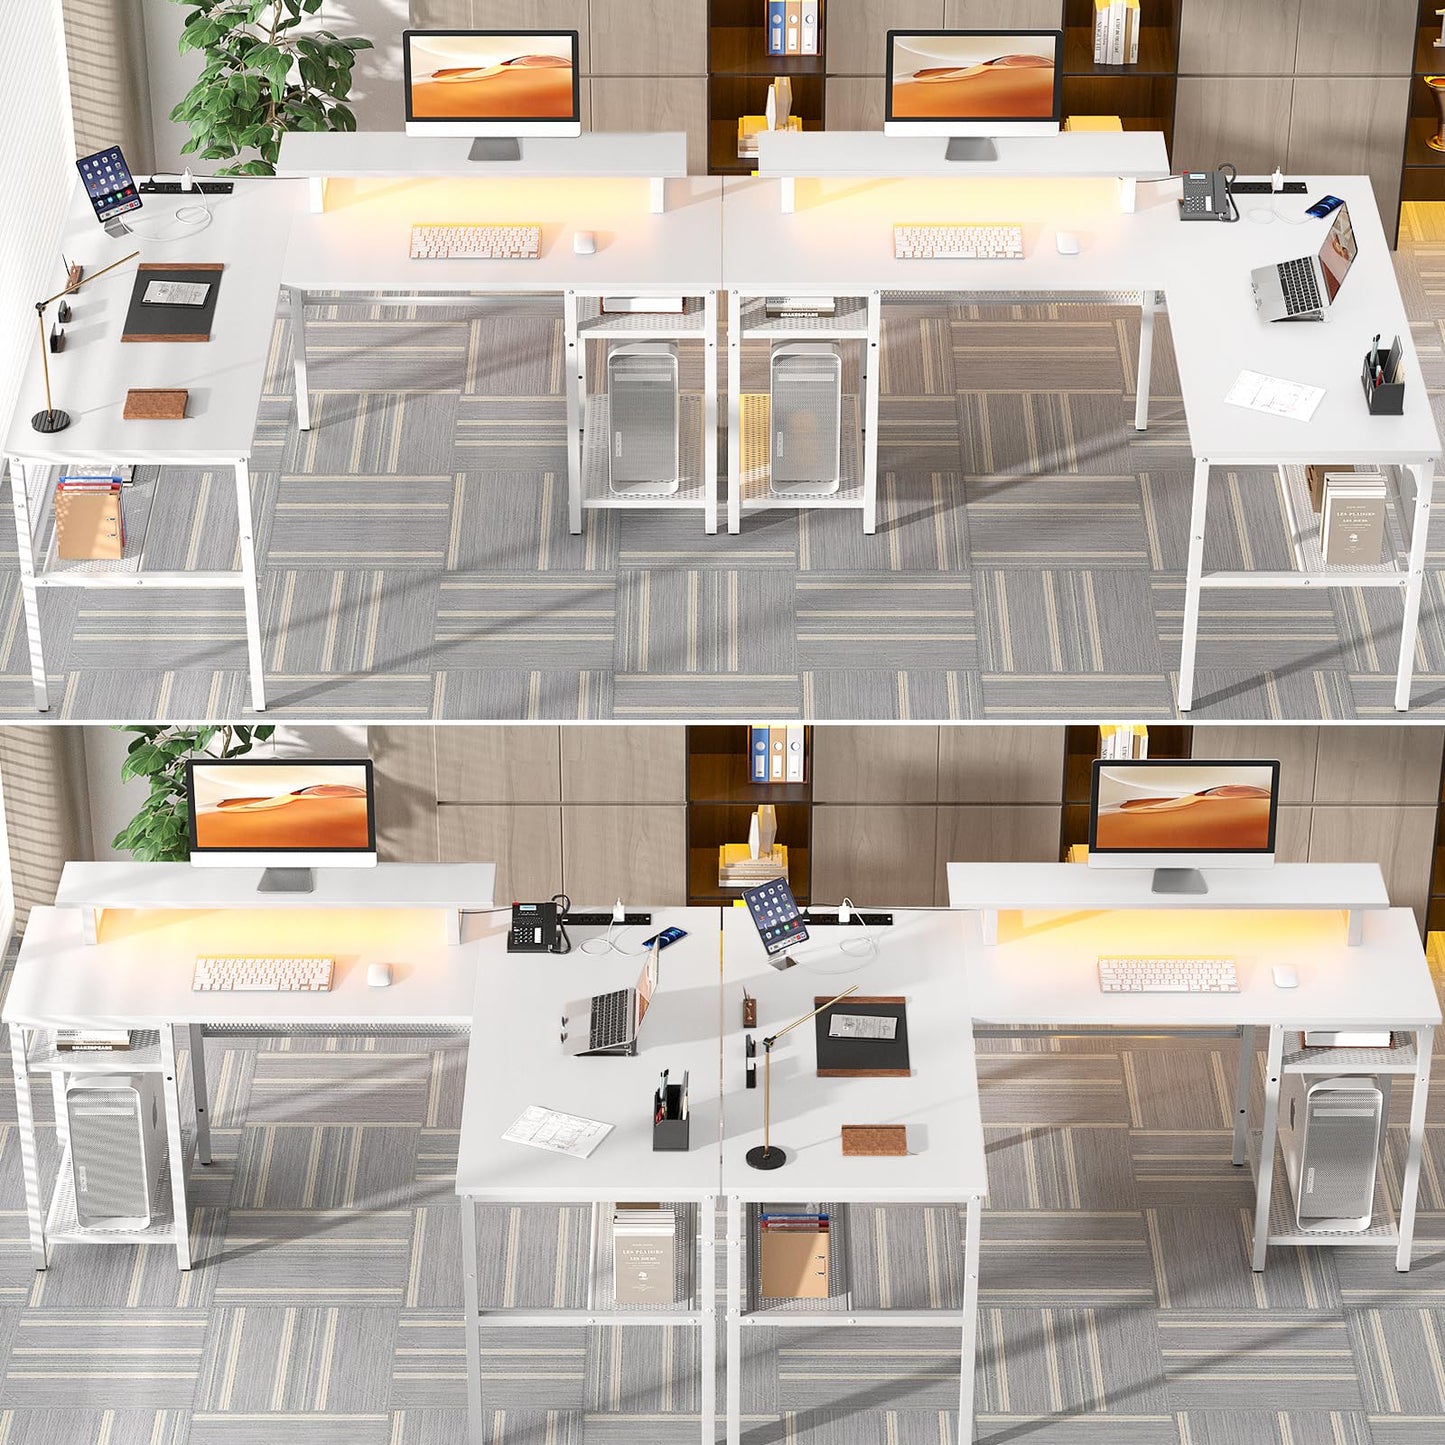 Unikito Reversible L Shaped Desk with Power Outlets and Smart LED Light, 55 Inch Computer Office Desk, Unique Grid Design, Corner Writing Gaming Table with Monitor Stand and Storage Shelf, White